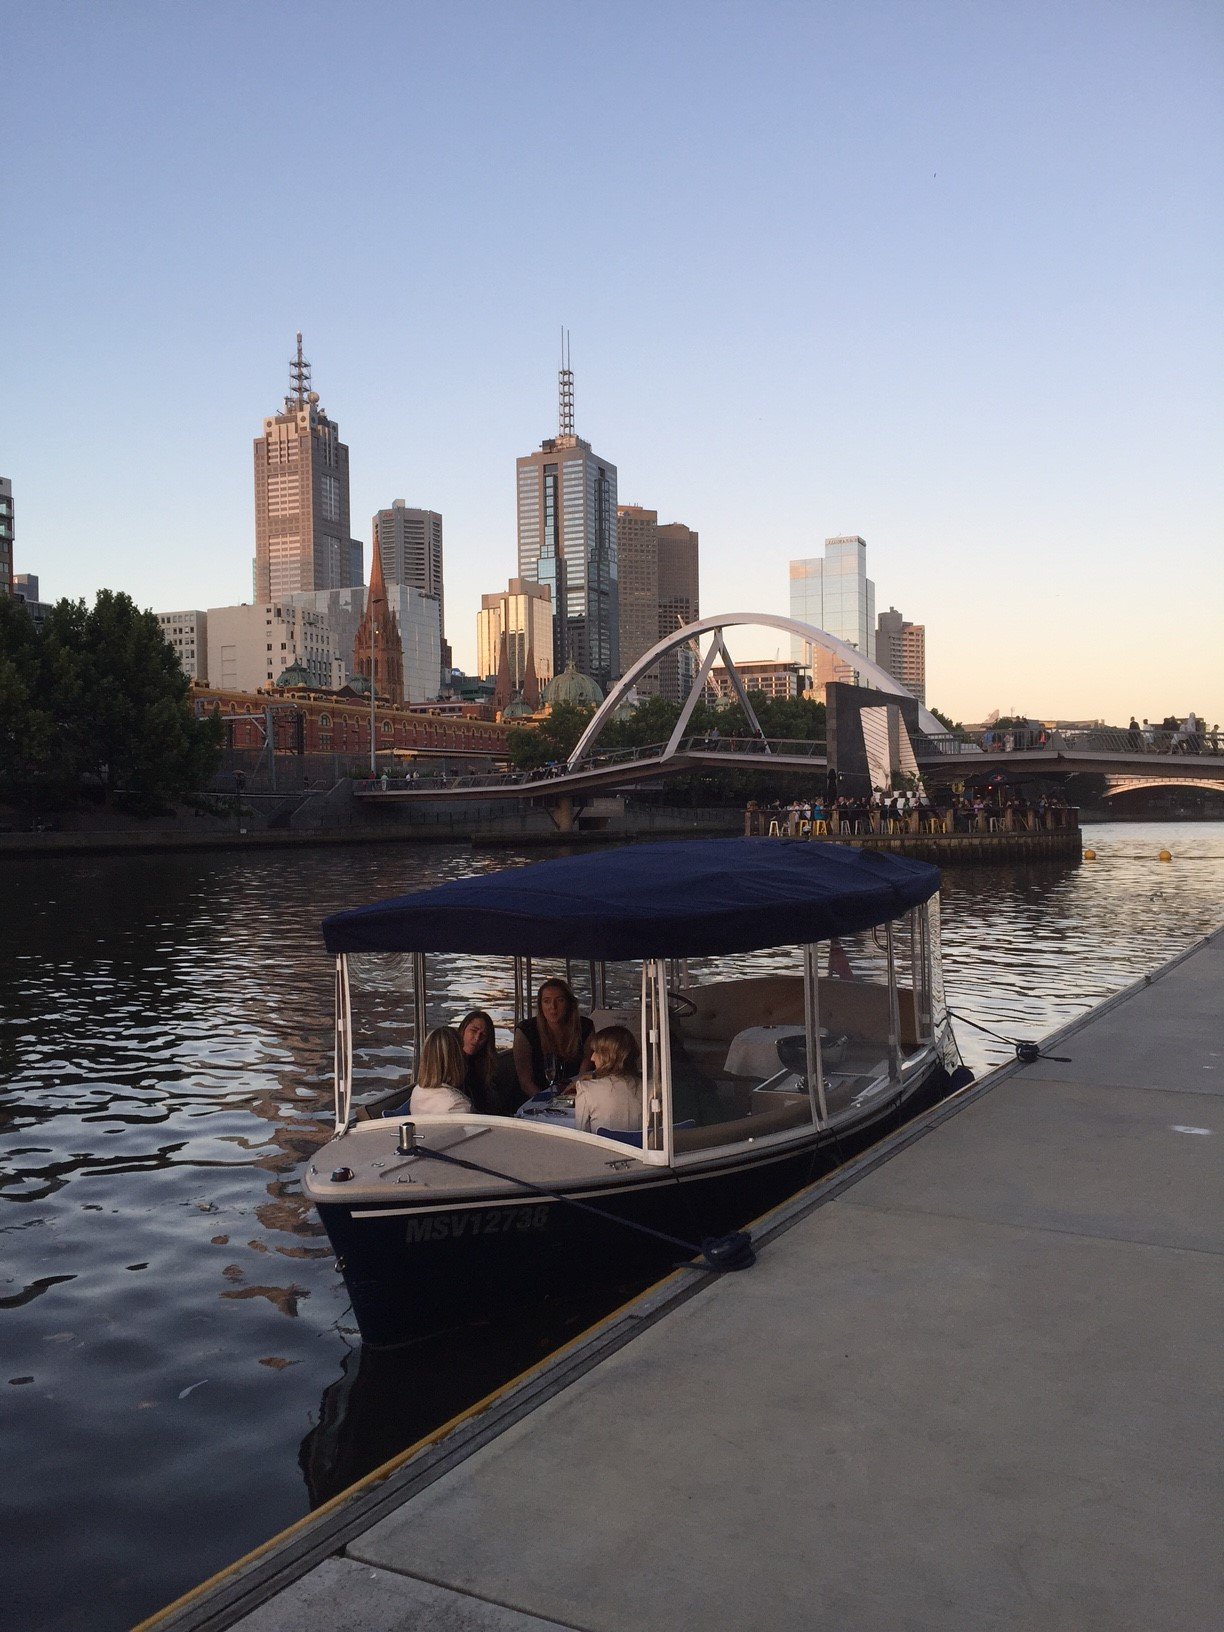 Take a private cruise on the Yarra River Melbourne